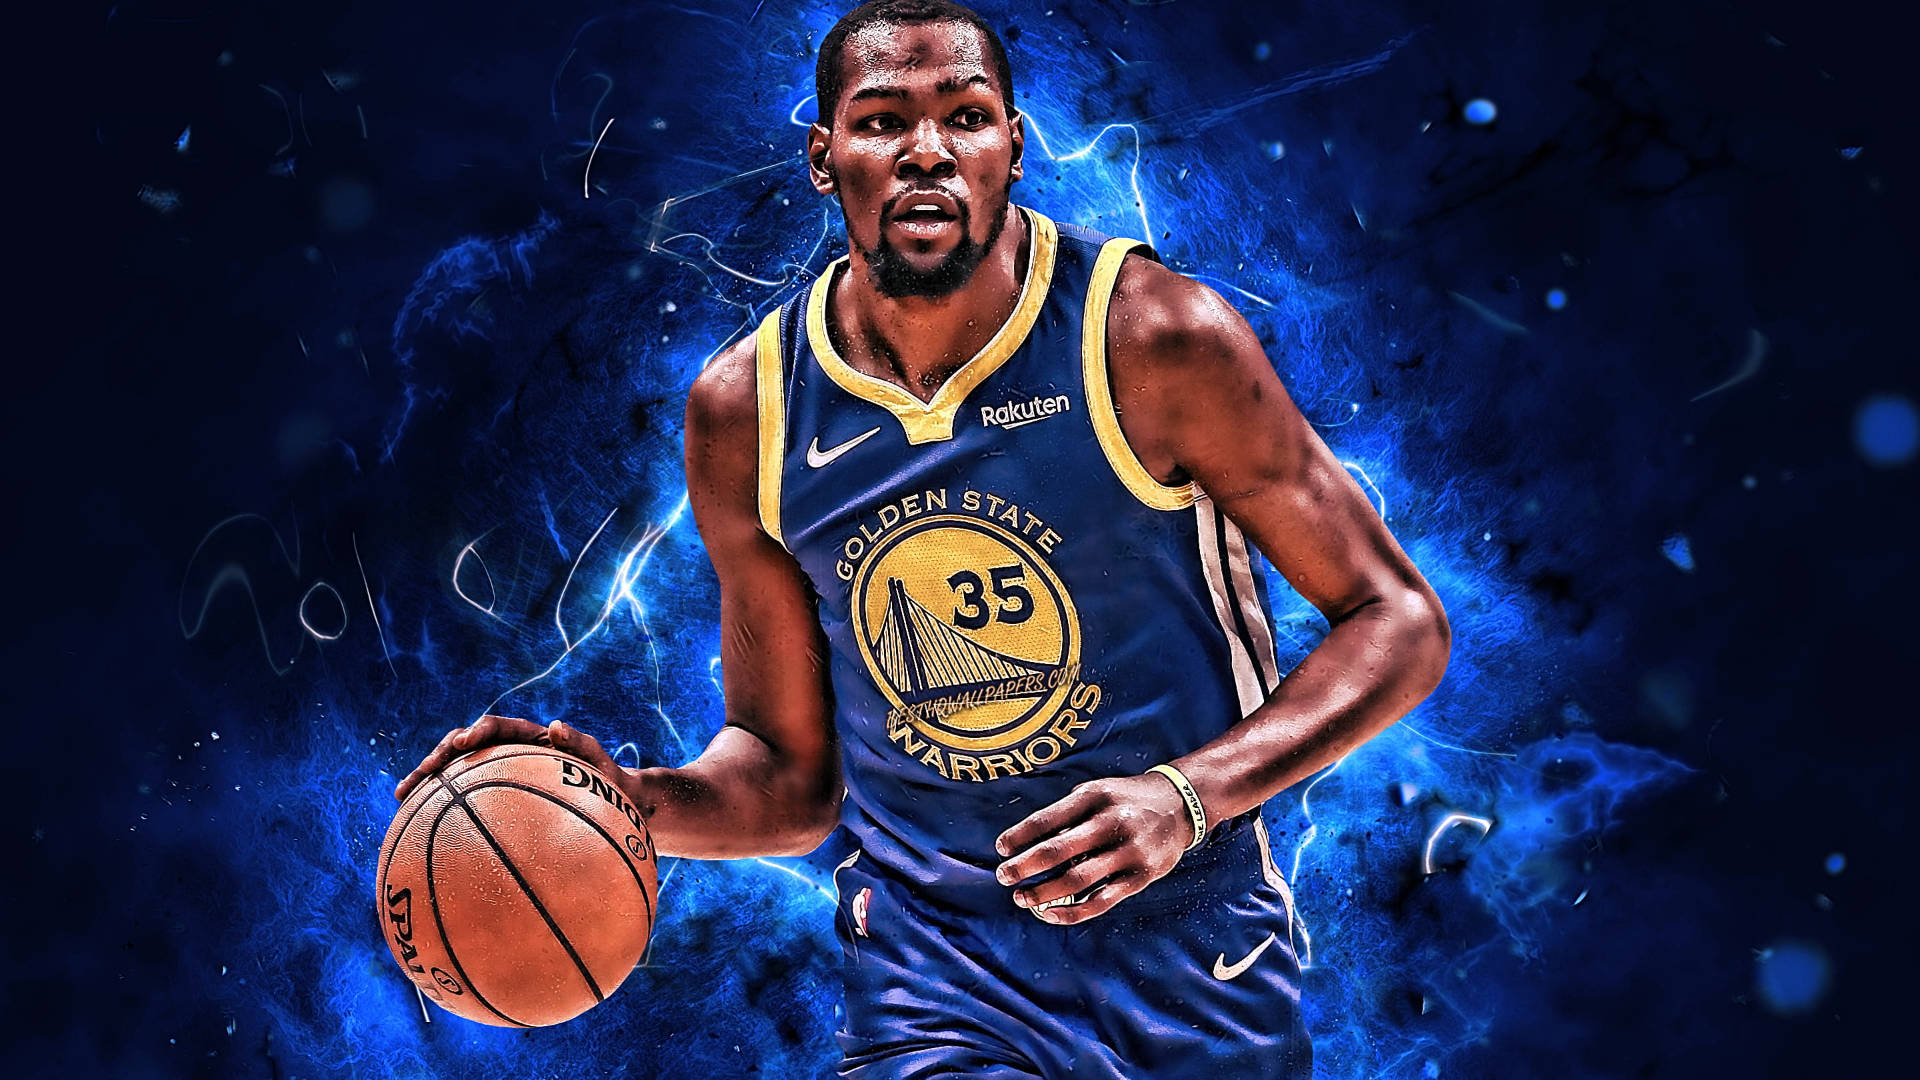 Blue Kevin Durant Cool Wallpaper